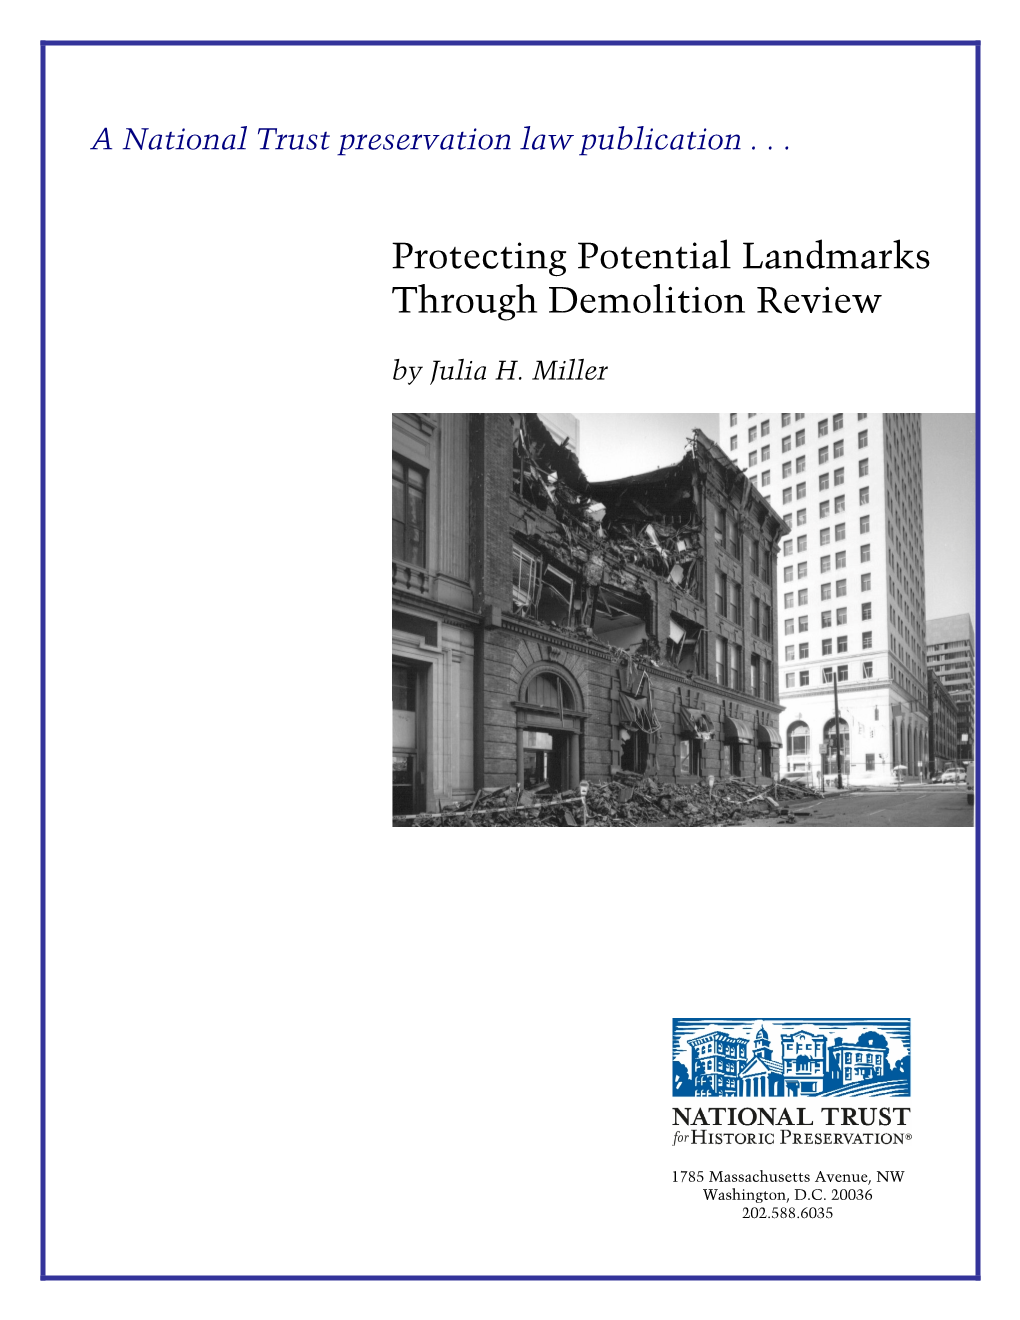 Protecting Potential Landmarks Through Demolition Review